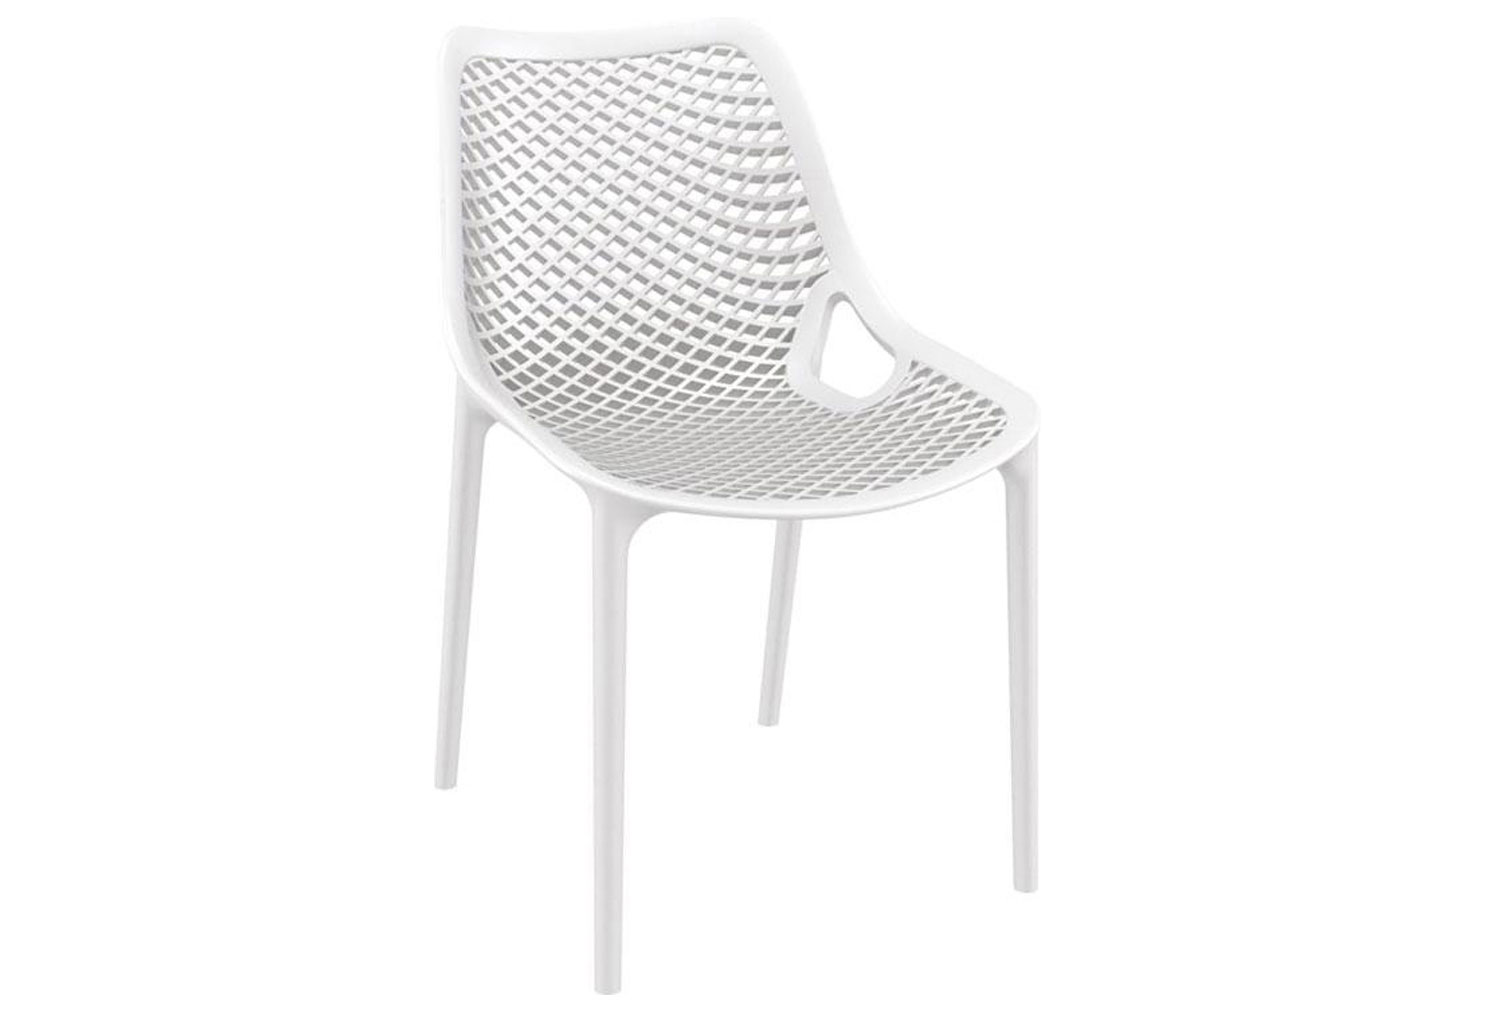 Qty 2 - Stawell Stacking Side Chair, White